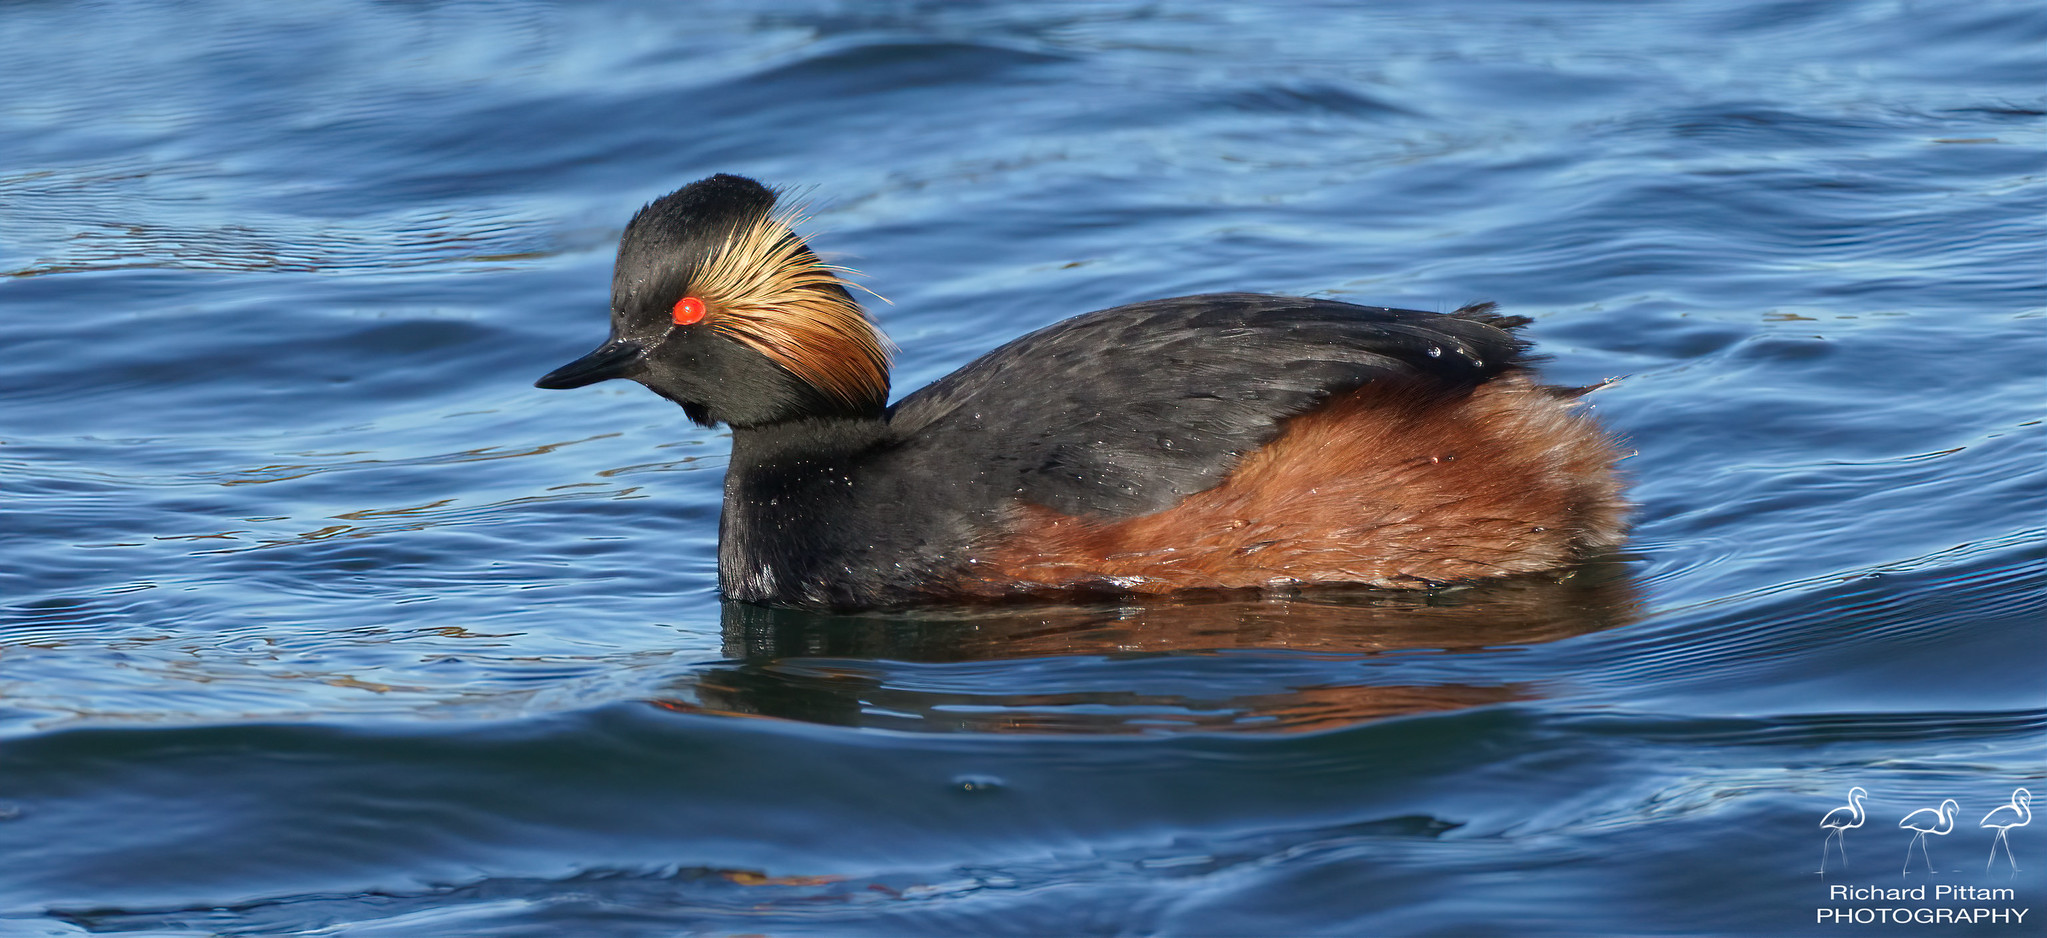 Black-necked Grebe - very cold and windy day